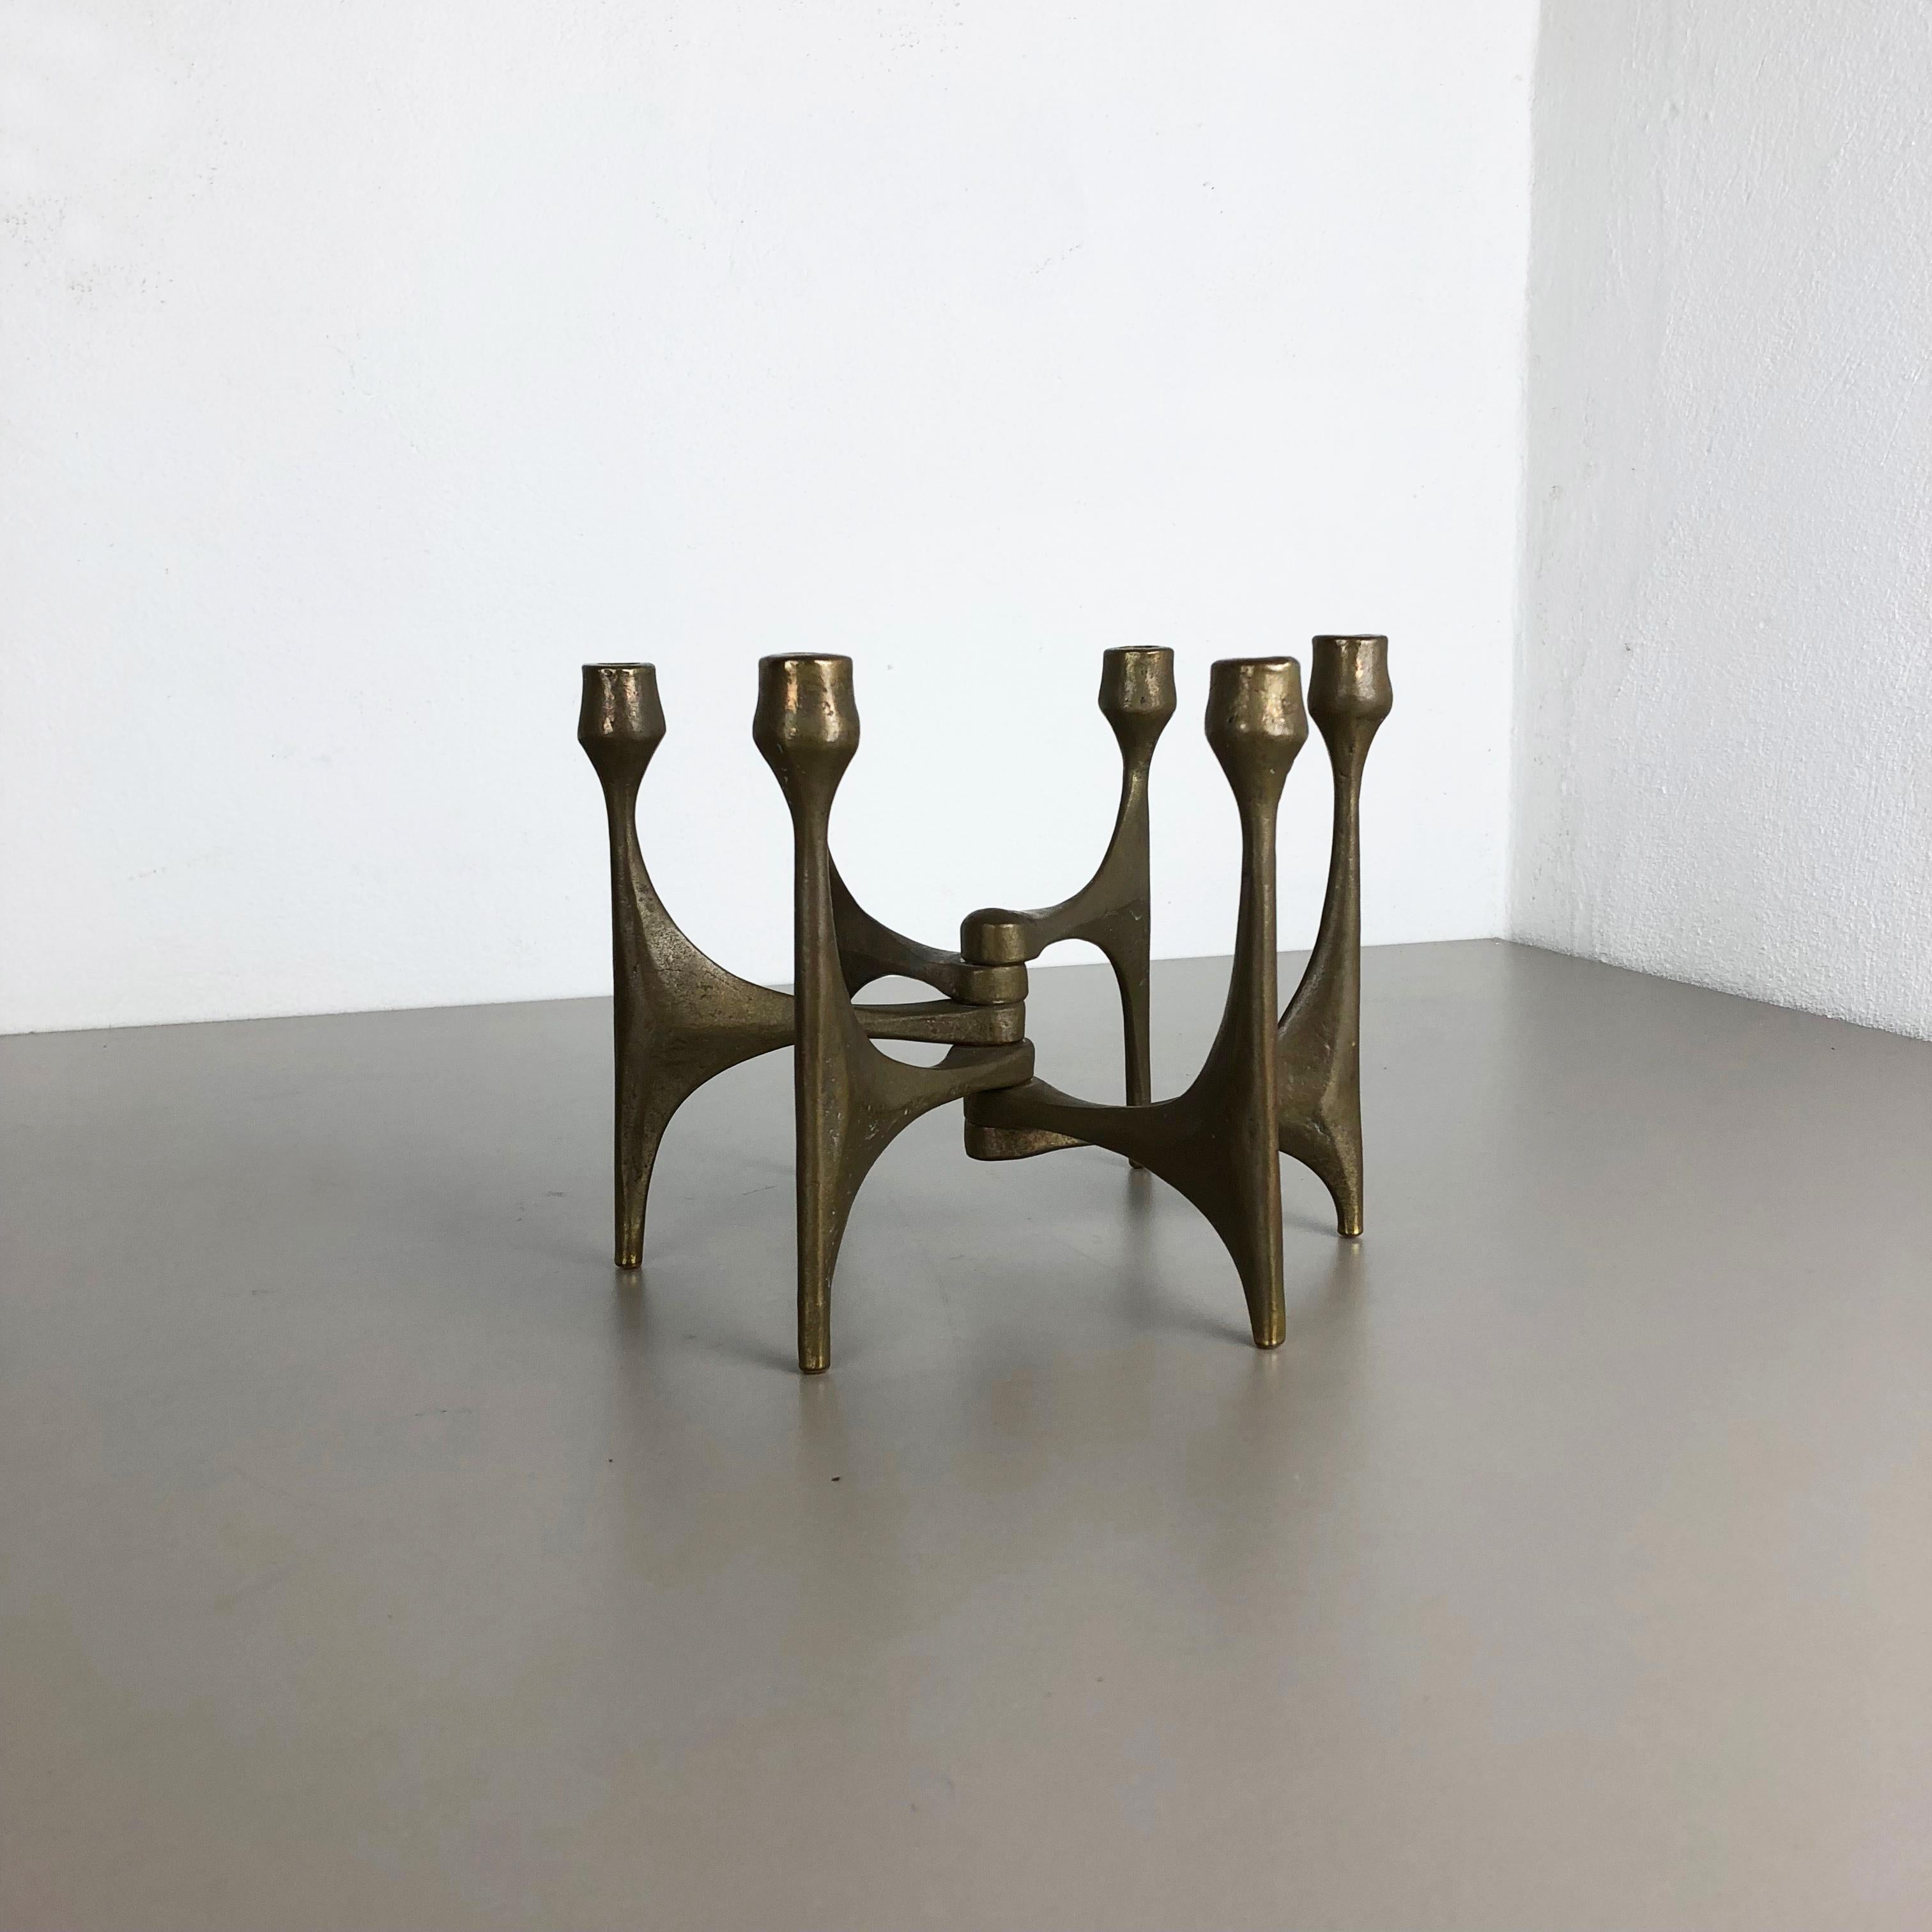 Article: Brutalist candleholder

Origin: Germany

Design producer: Michael Harjes

Material: bronze

Decade: 1960s

Description: This original vintage candleholder, was produced in the 1960s in Germany. Designed and executed by Michael